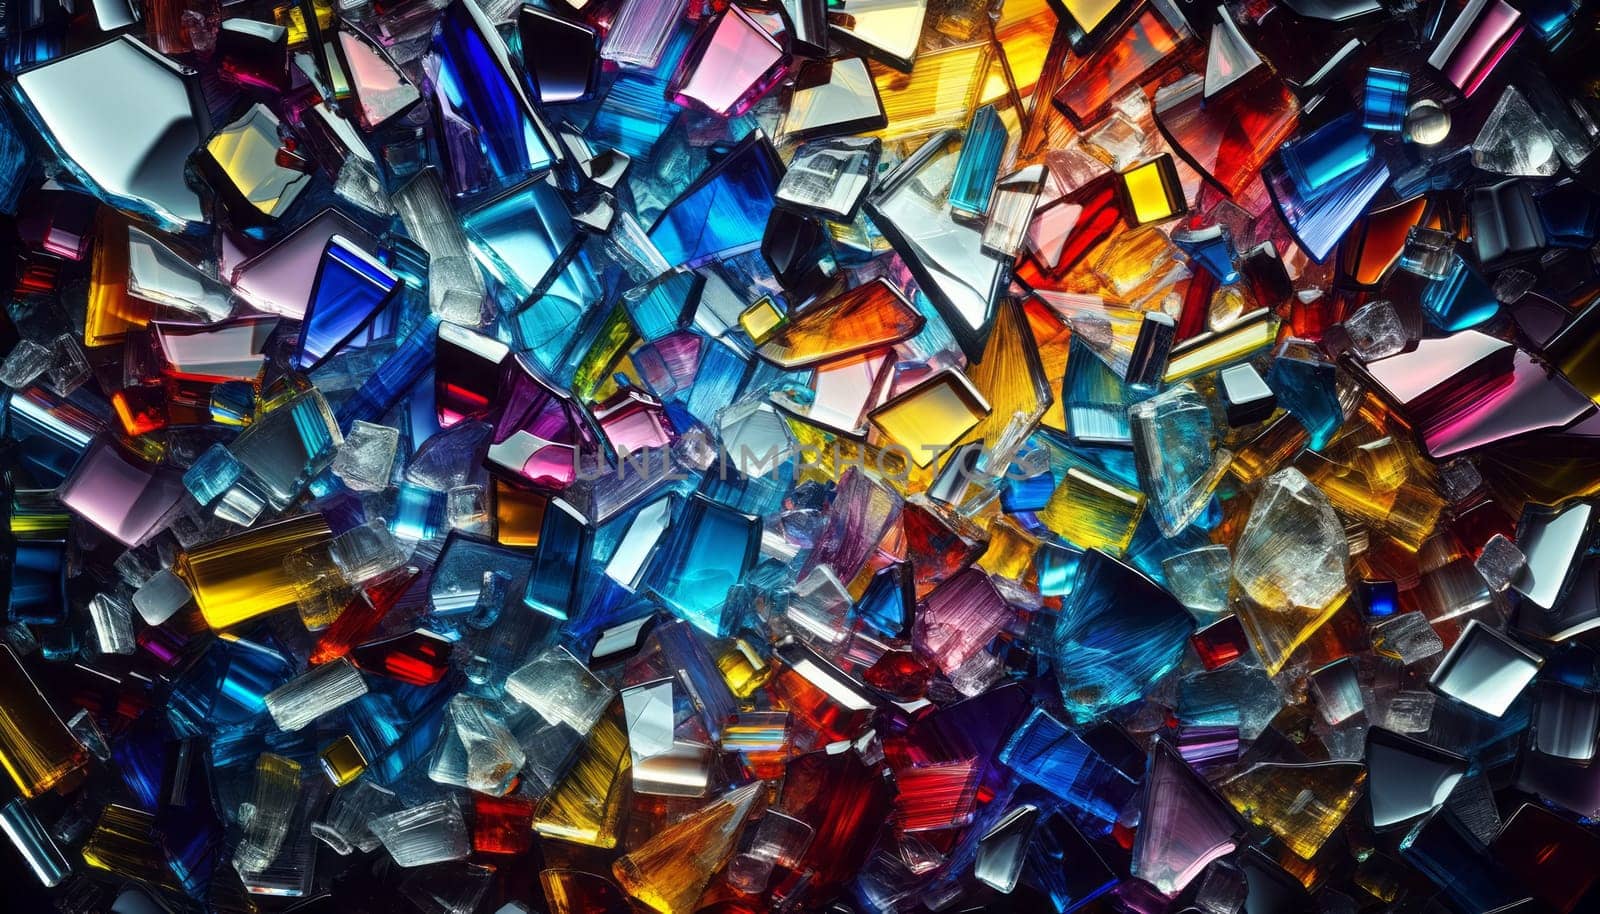 A close-up photography of shattered colored glass by nkotlyar